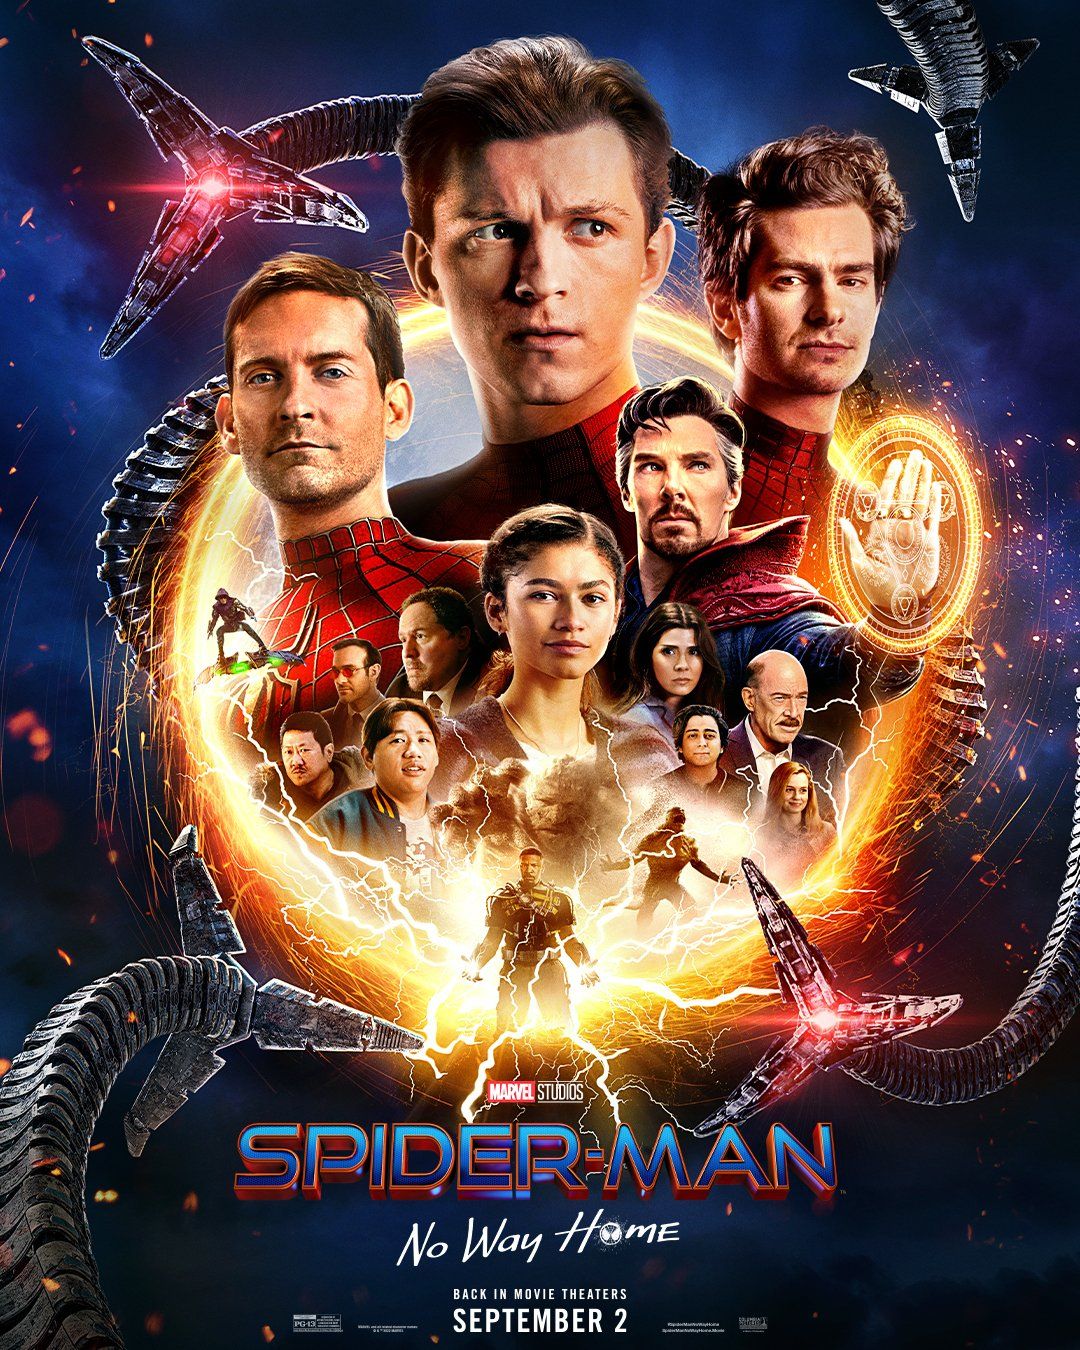 Spider-Man-No-Way-Home-extended-edition-Marvel-poster-1